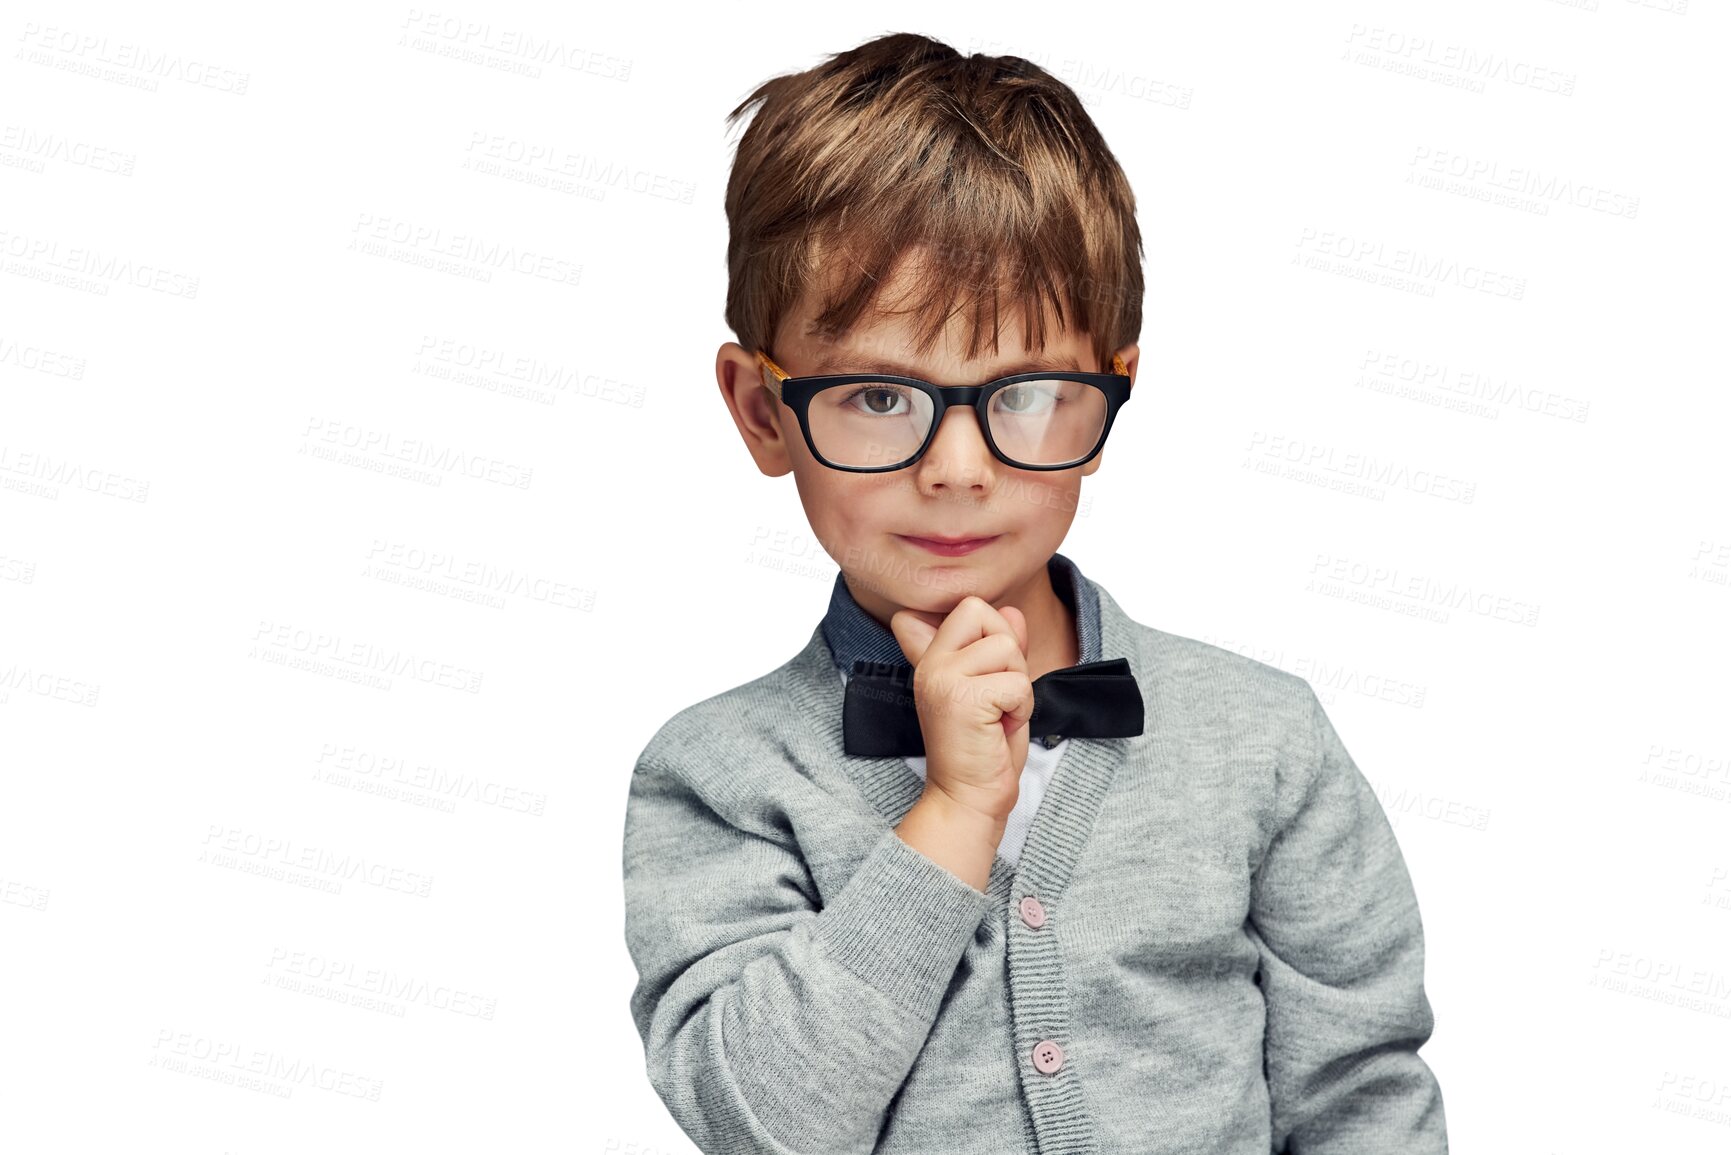 Buy stock photo Portrait, young boy or nerd fashion with glasses or confident  in trendy clothes with bow tie. Child model, face or thinking in style jersey for kindergarten or isolated on transparent png background